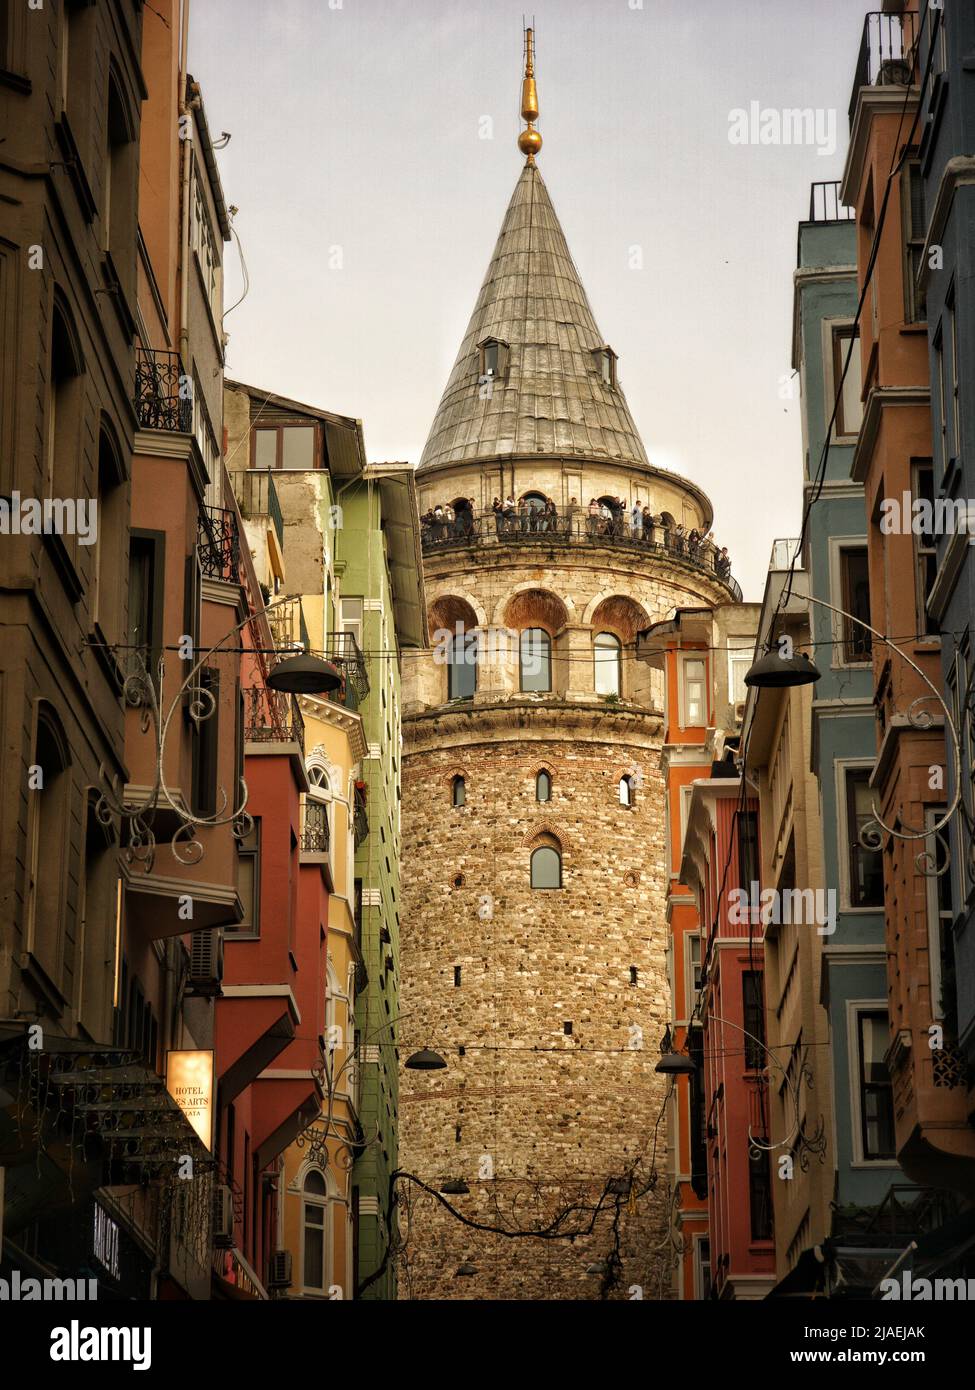 Best view of Galata Tower at Golden Our. Photo spot at Istambul. Stock Photo